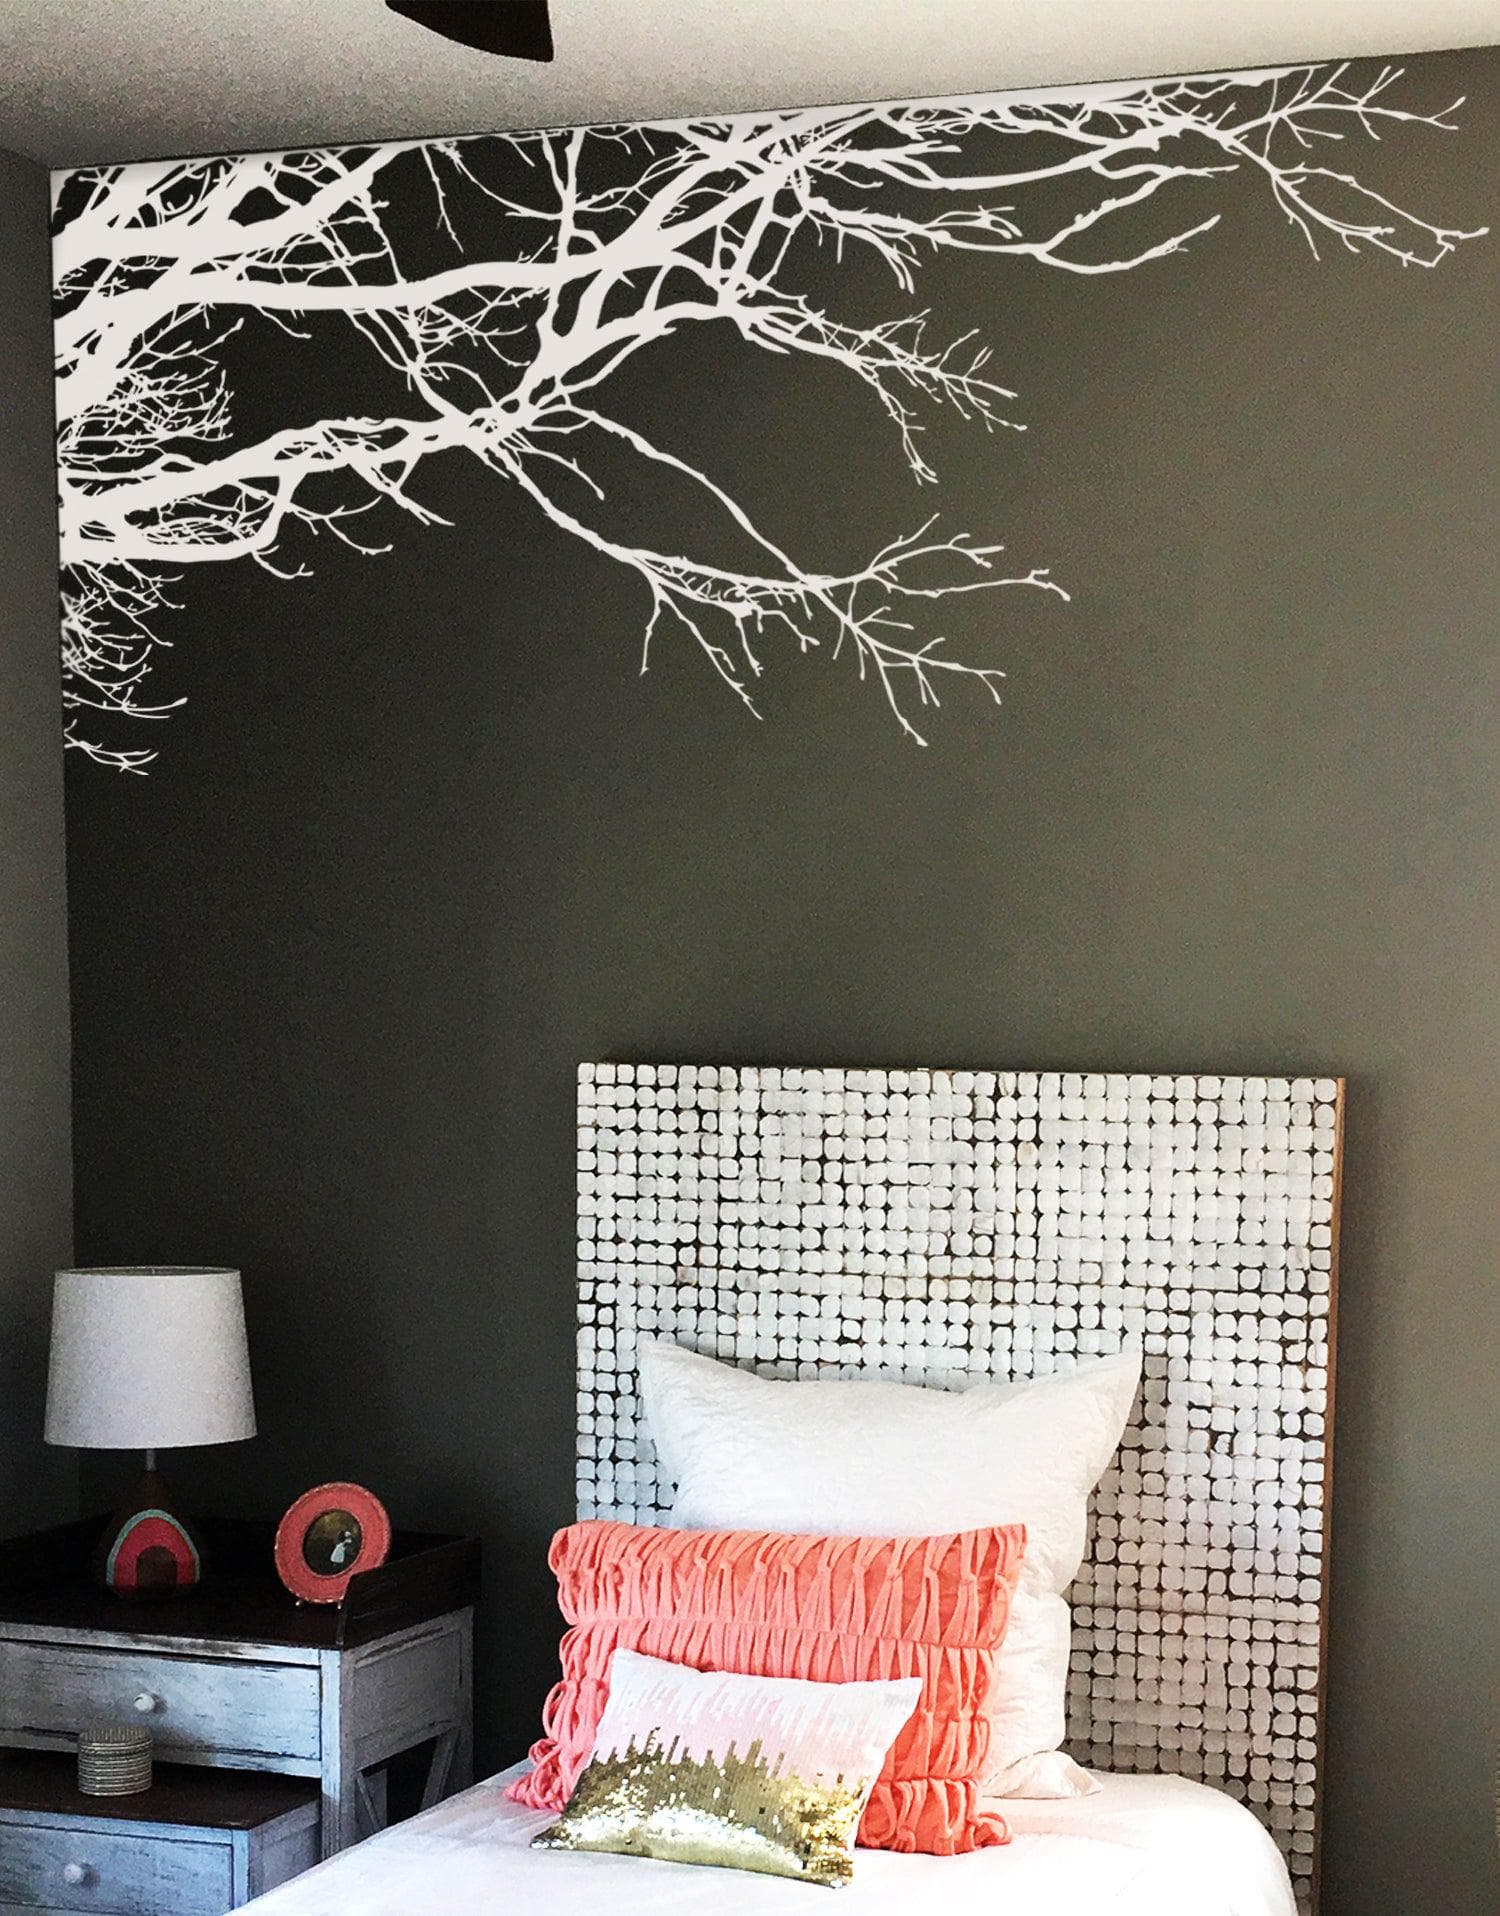 white tree wall decals